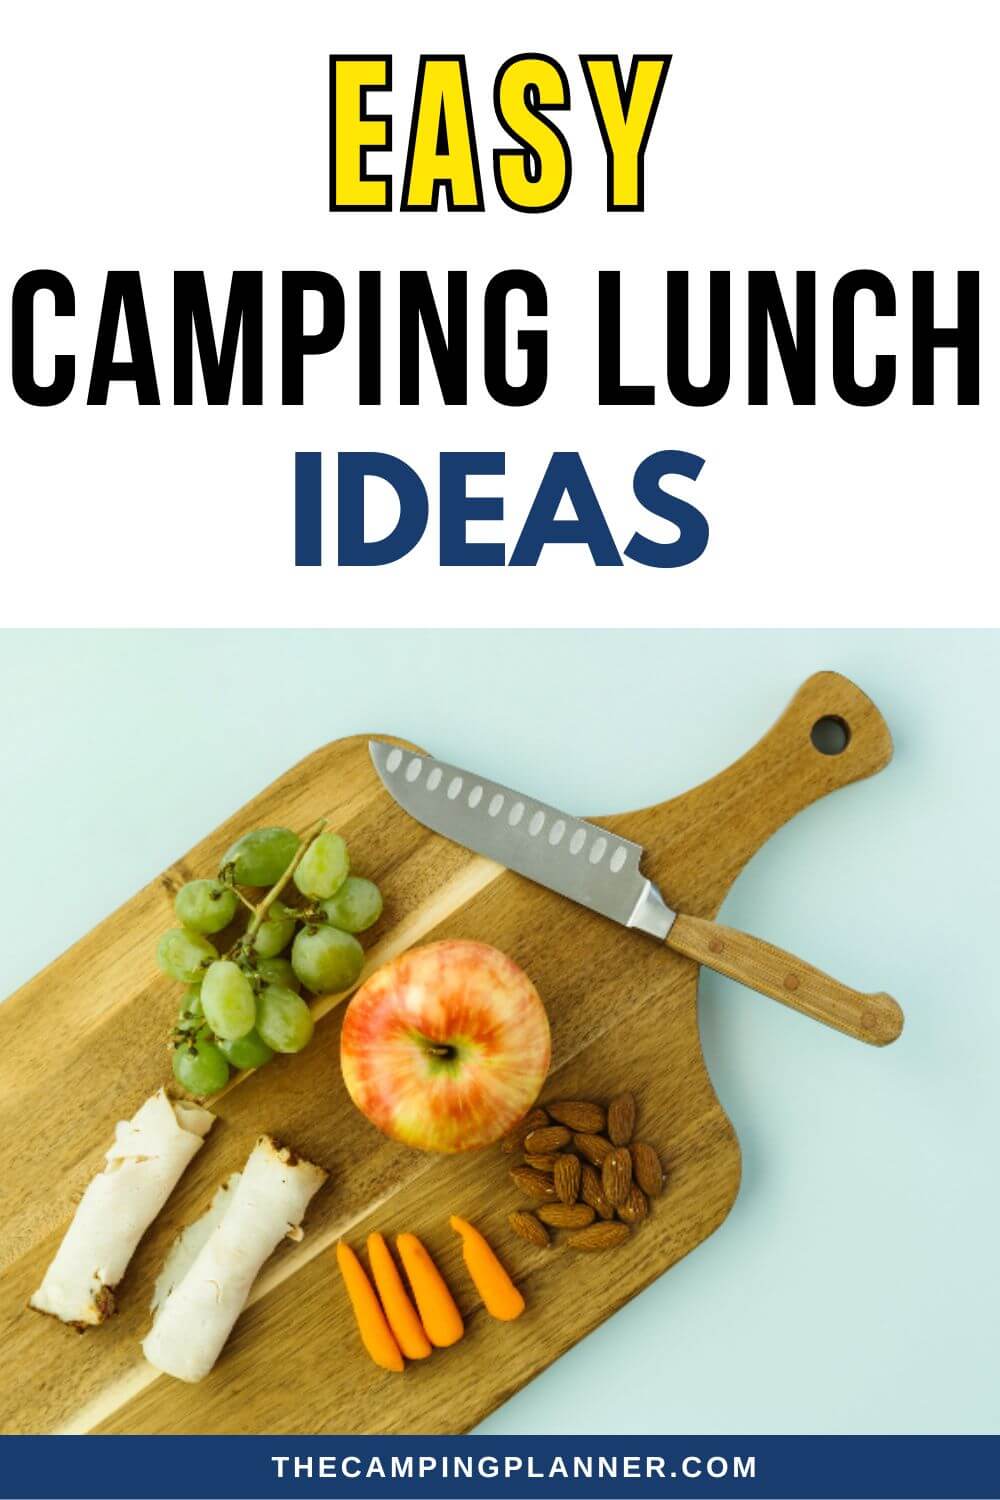 easy camping lunch ideas with a chopping board with chopped fruit and vegetables.